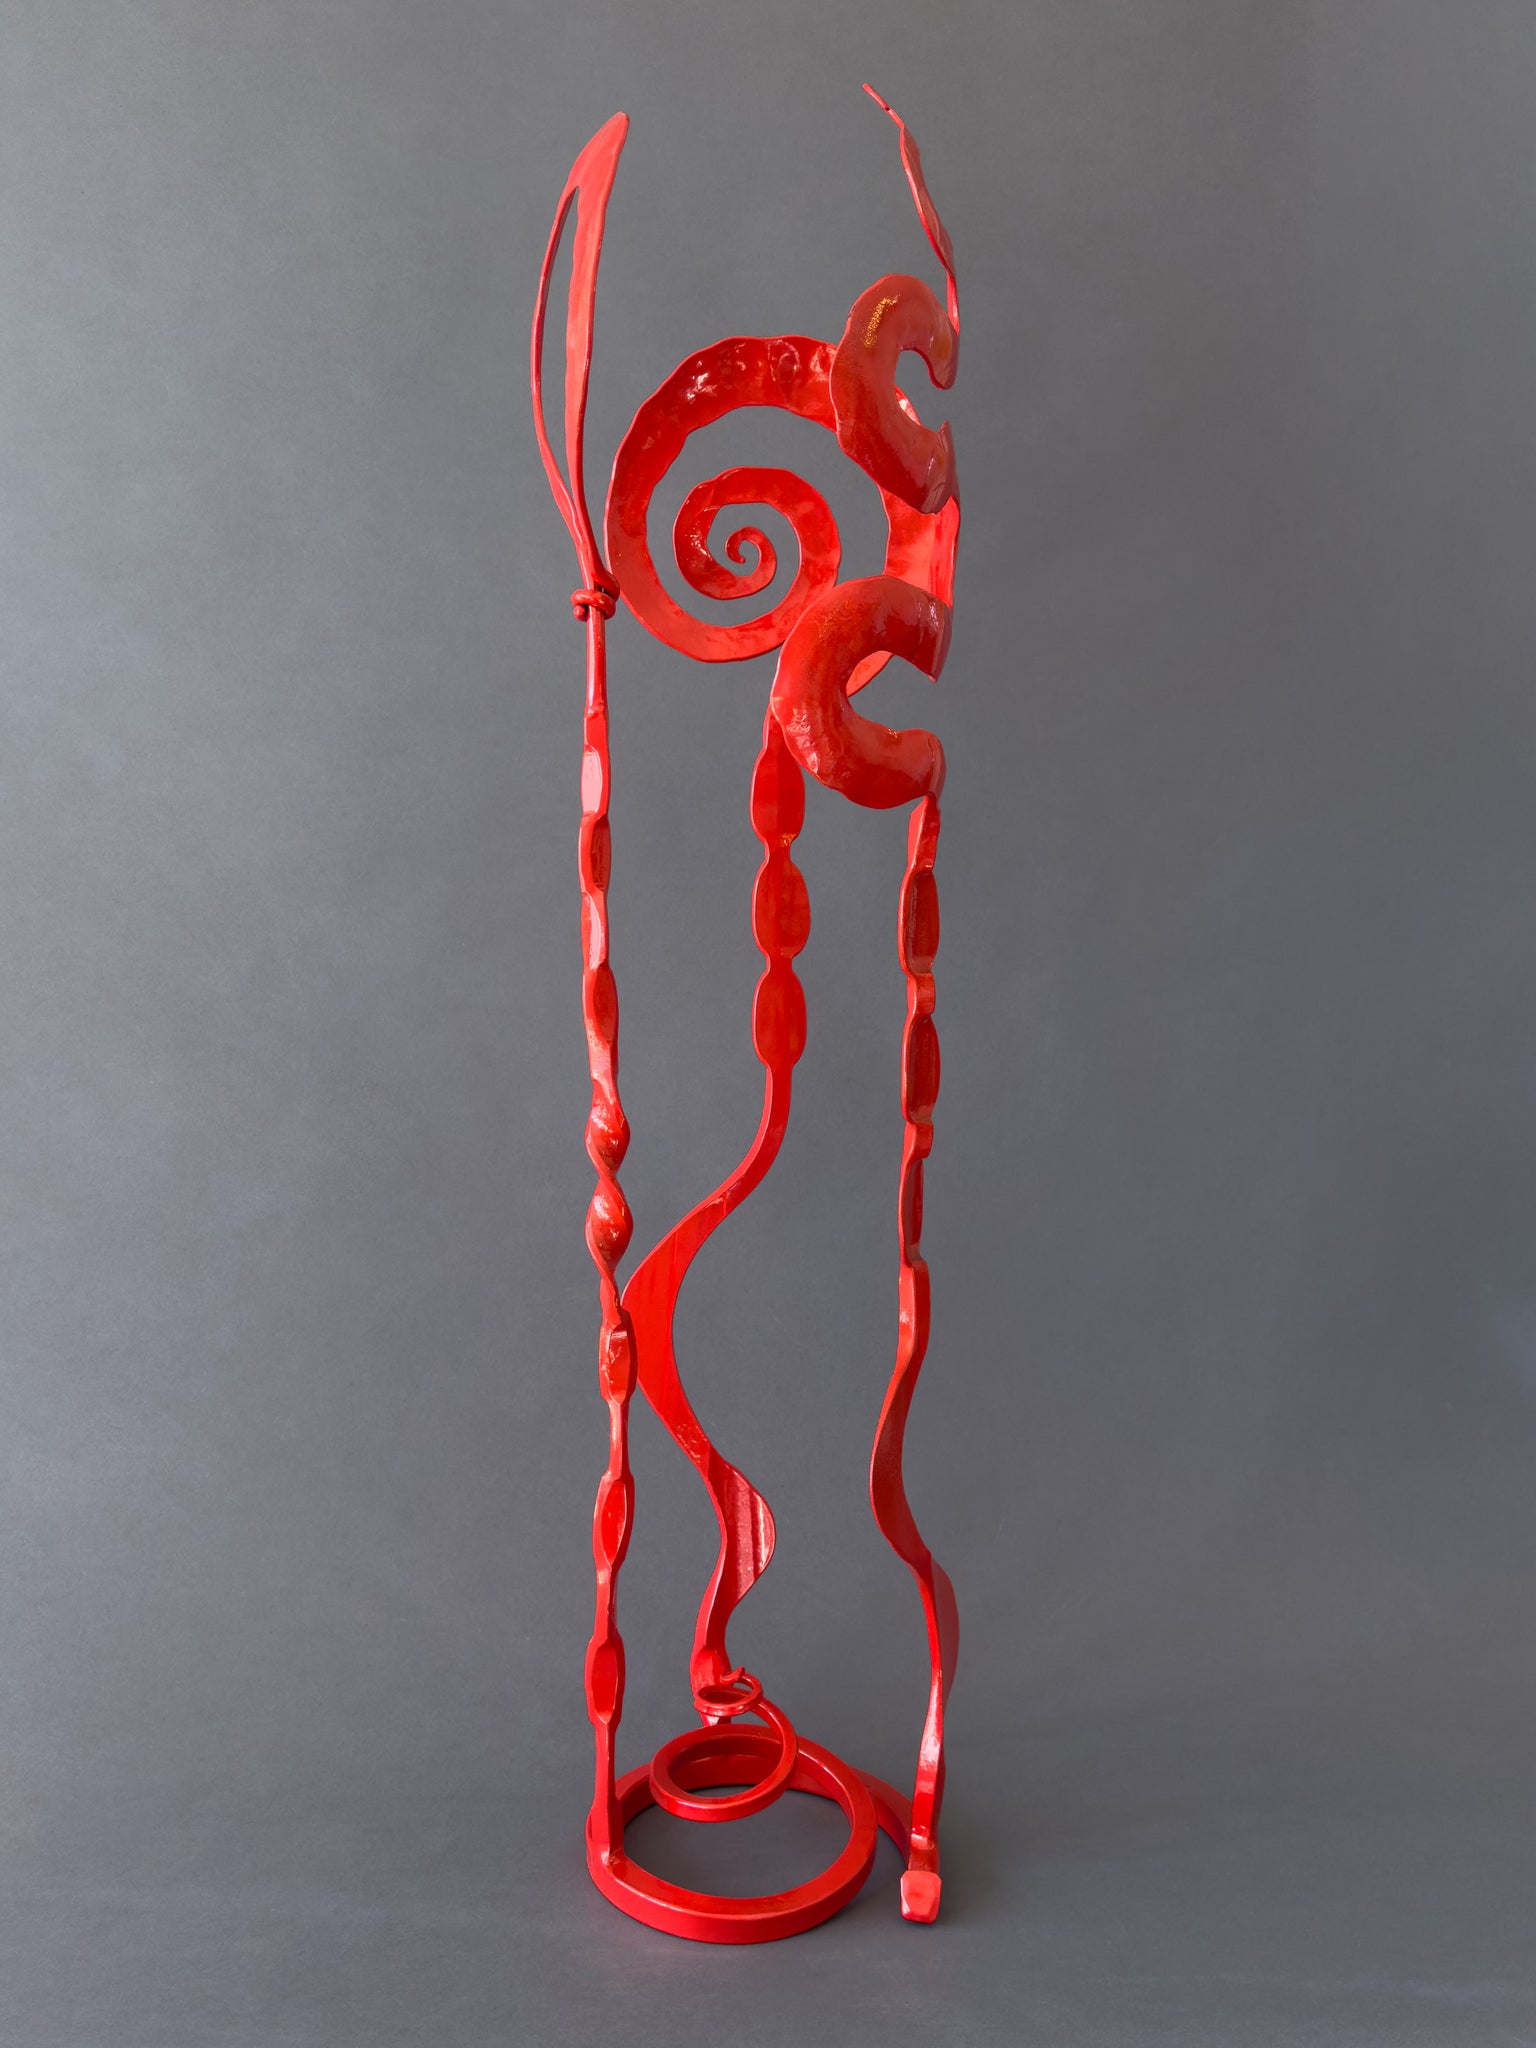 Small red abstract hand forged steel sculpture by blacksmith artist, Christopher Thomson.